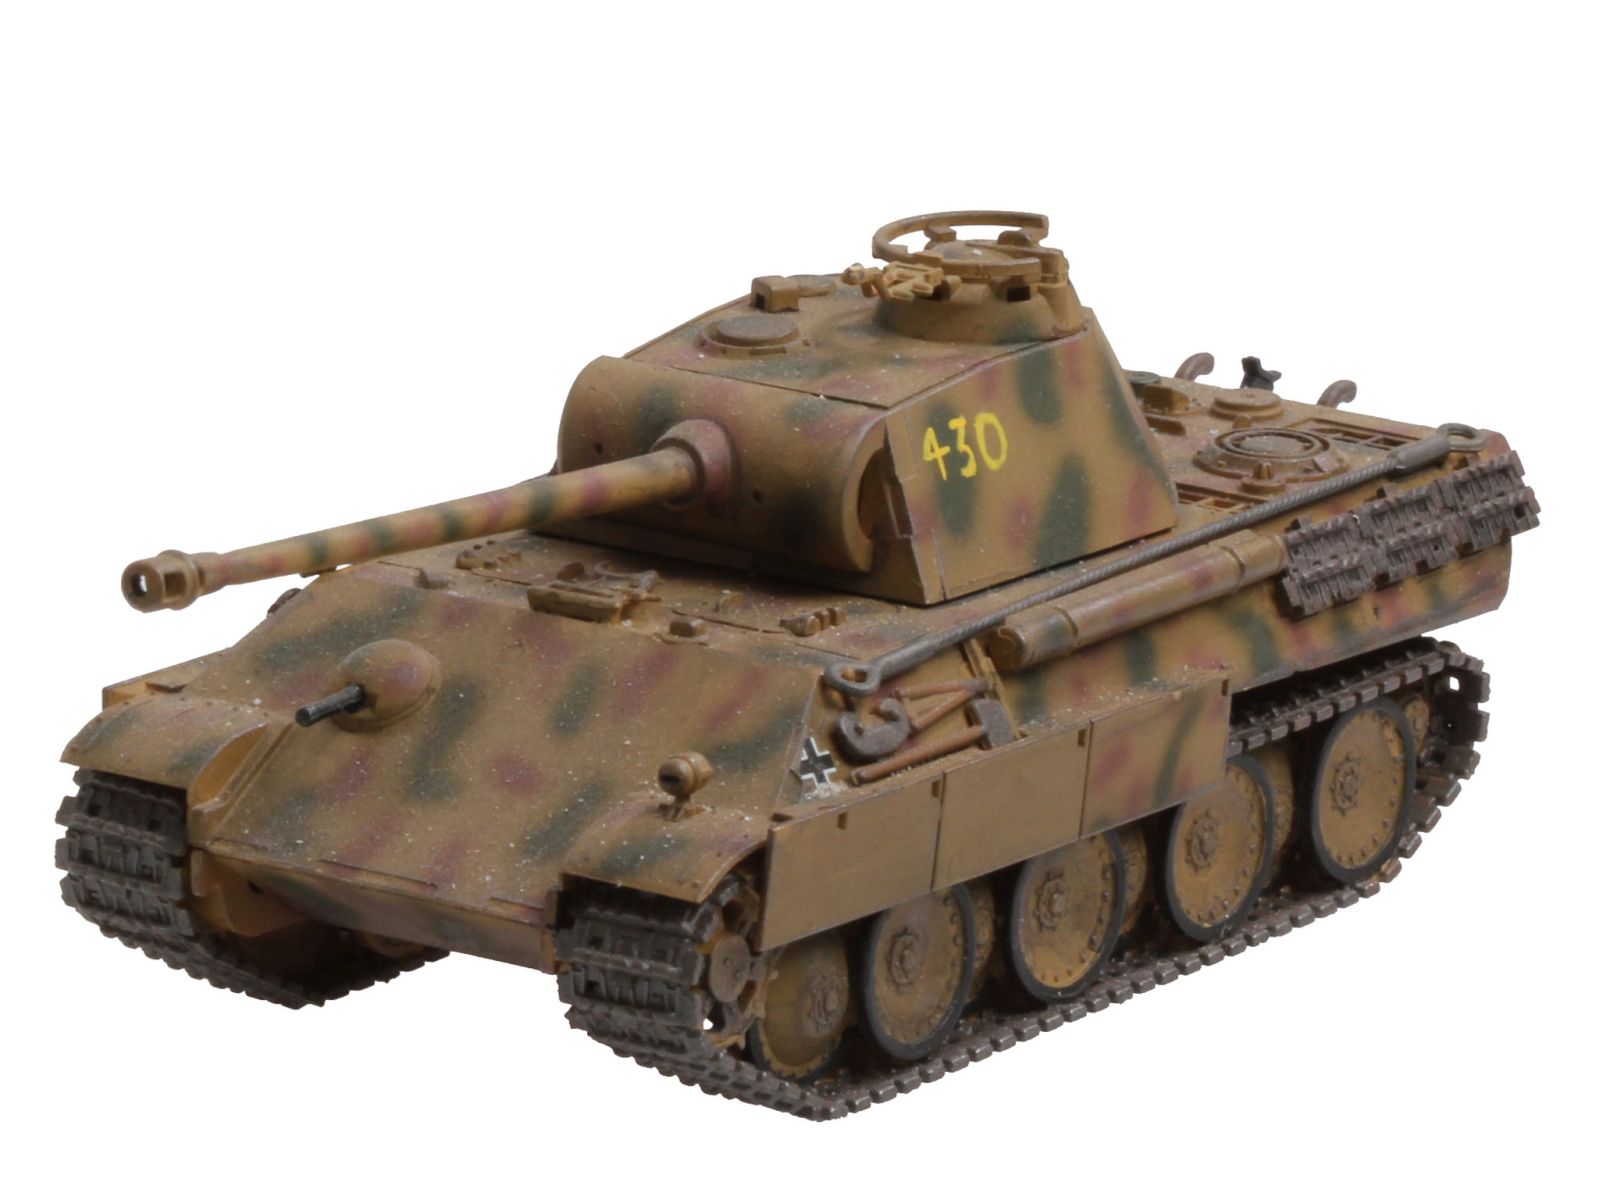 Revell 03171 - PzKpfw V Panther Ausf.G (Sd.Kfz. 171)